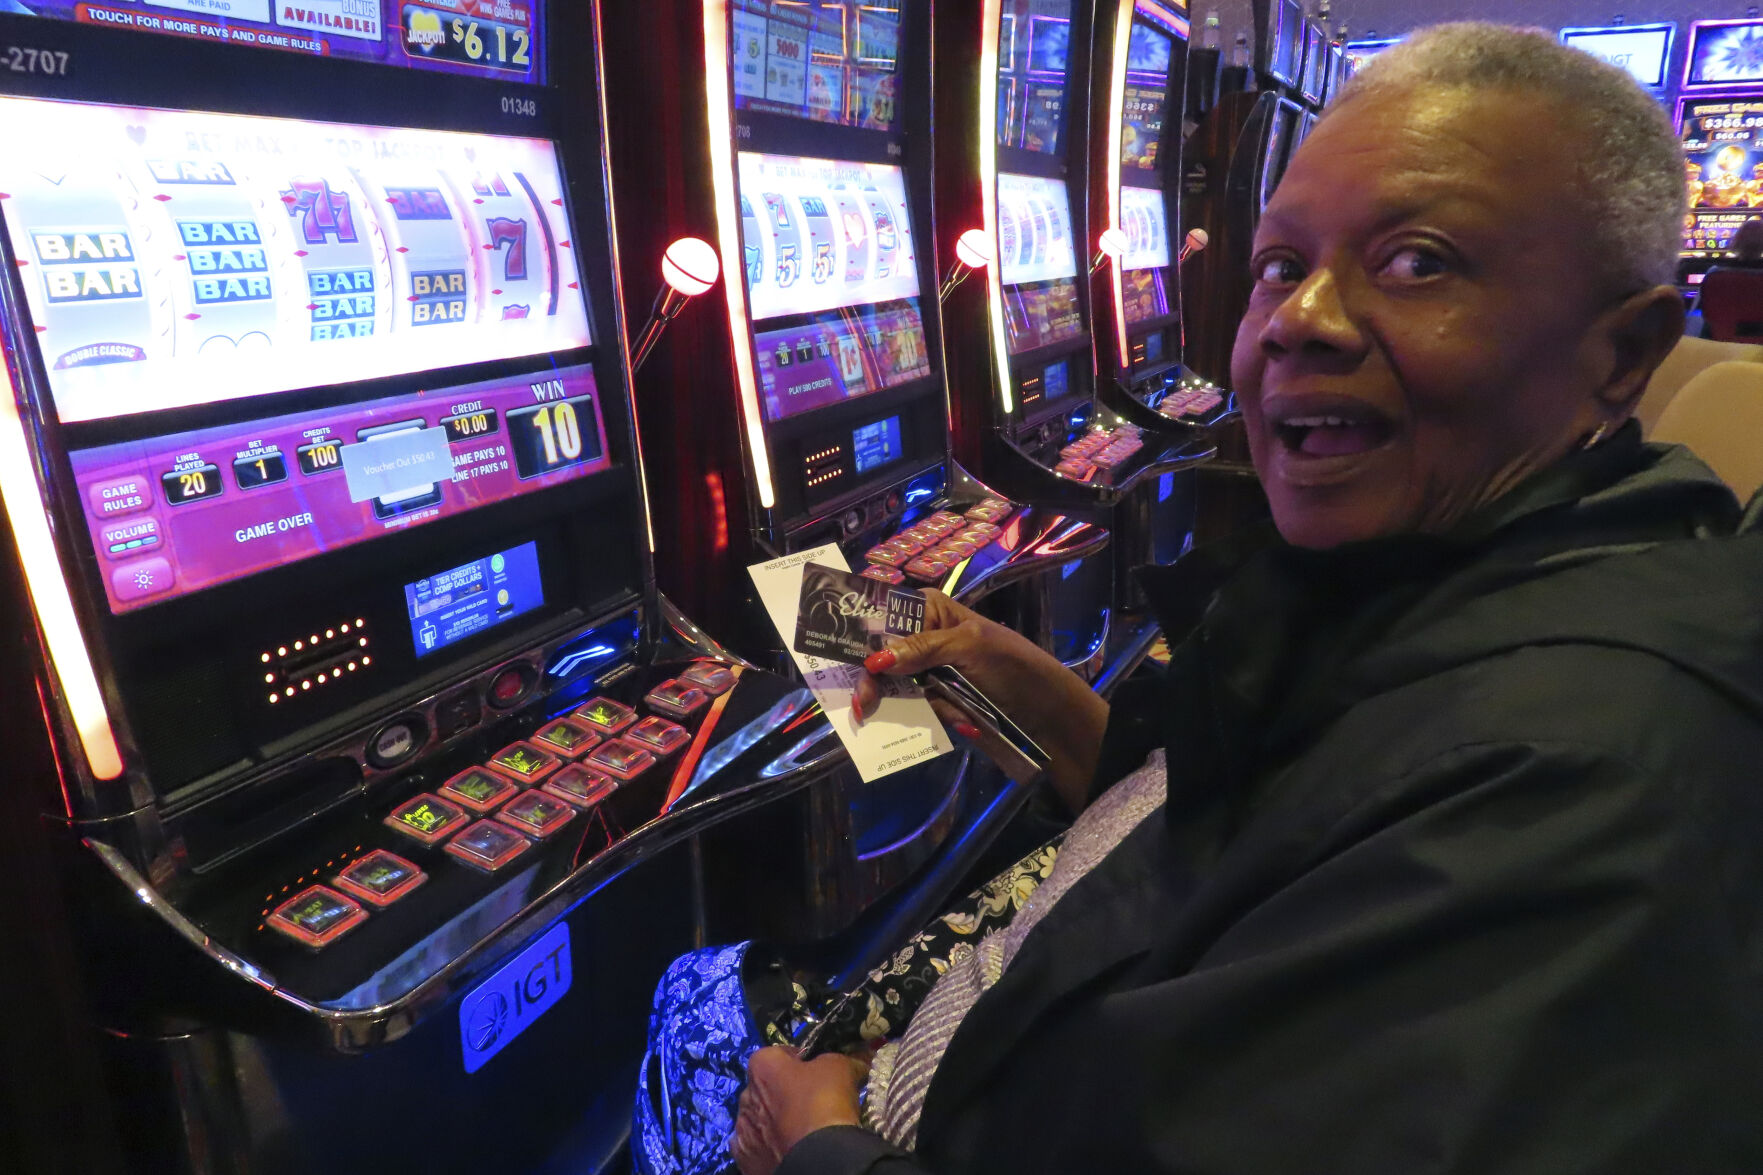 <p>A gambler adds money to a slot machine at the Hard Rock casino in Atlantic City NJ on Aug. 8, 2022. Figures released on Feb. 15, 2023 by the American Gaming Association show the U.S. commercial casino industry won over $60 billion from gamblers in 2022, its best year ever. (AP Photo/Wayne Parry)</p>   PHOTO CREDIT: Wayne Parry 